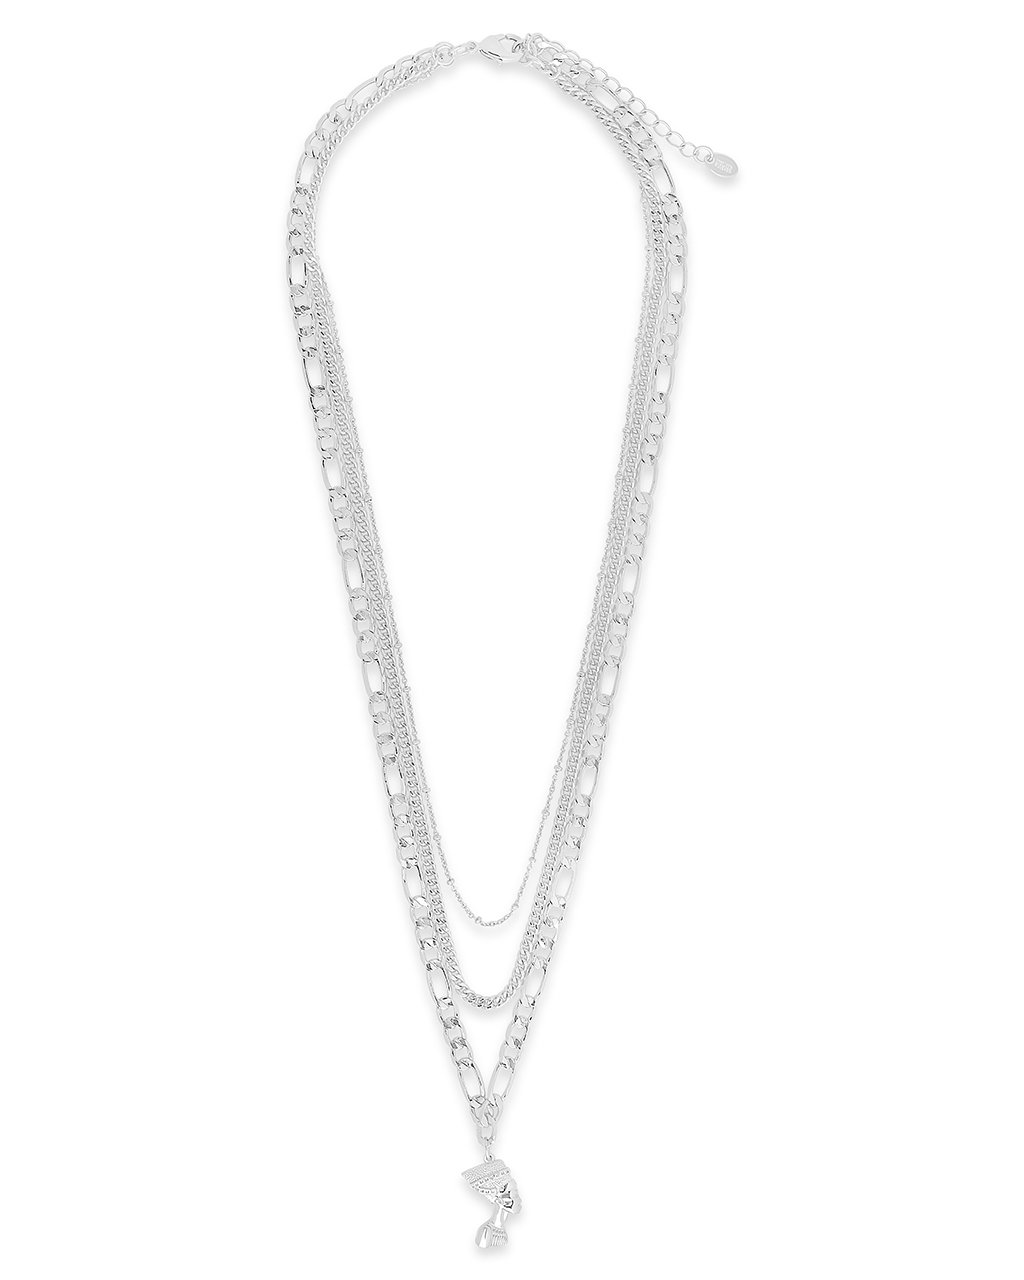 Layered Chains with Pharaoh Pendant - Sterling Forever